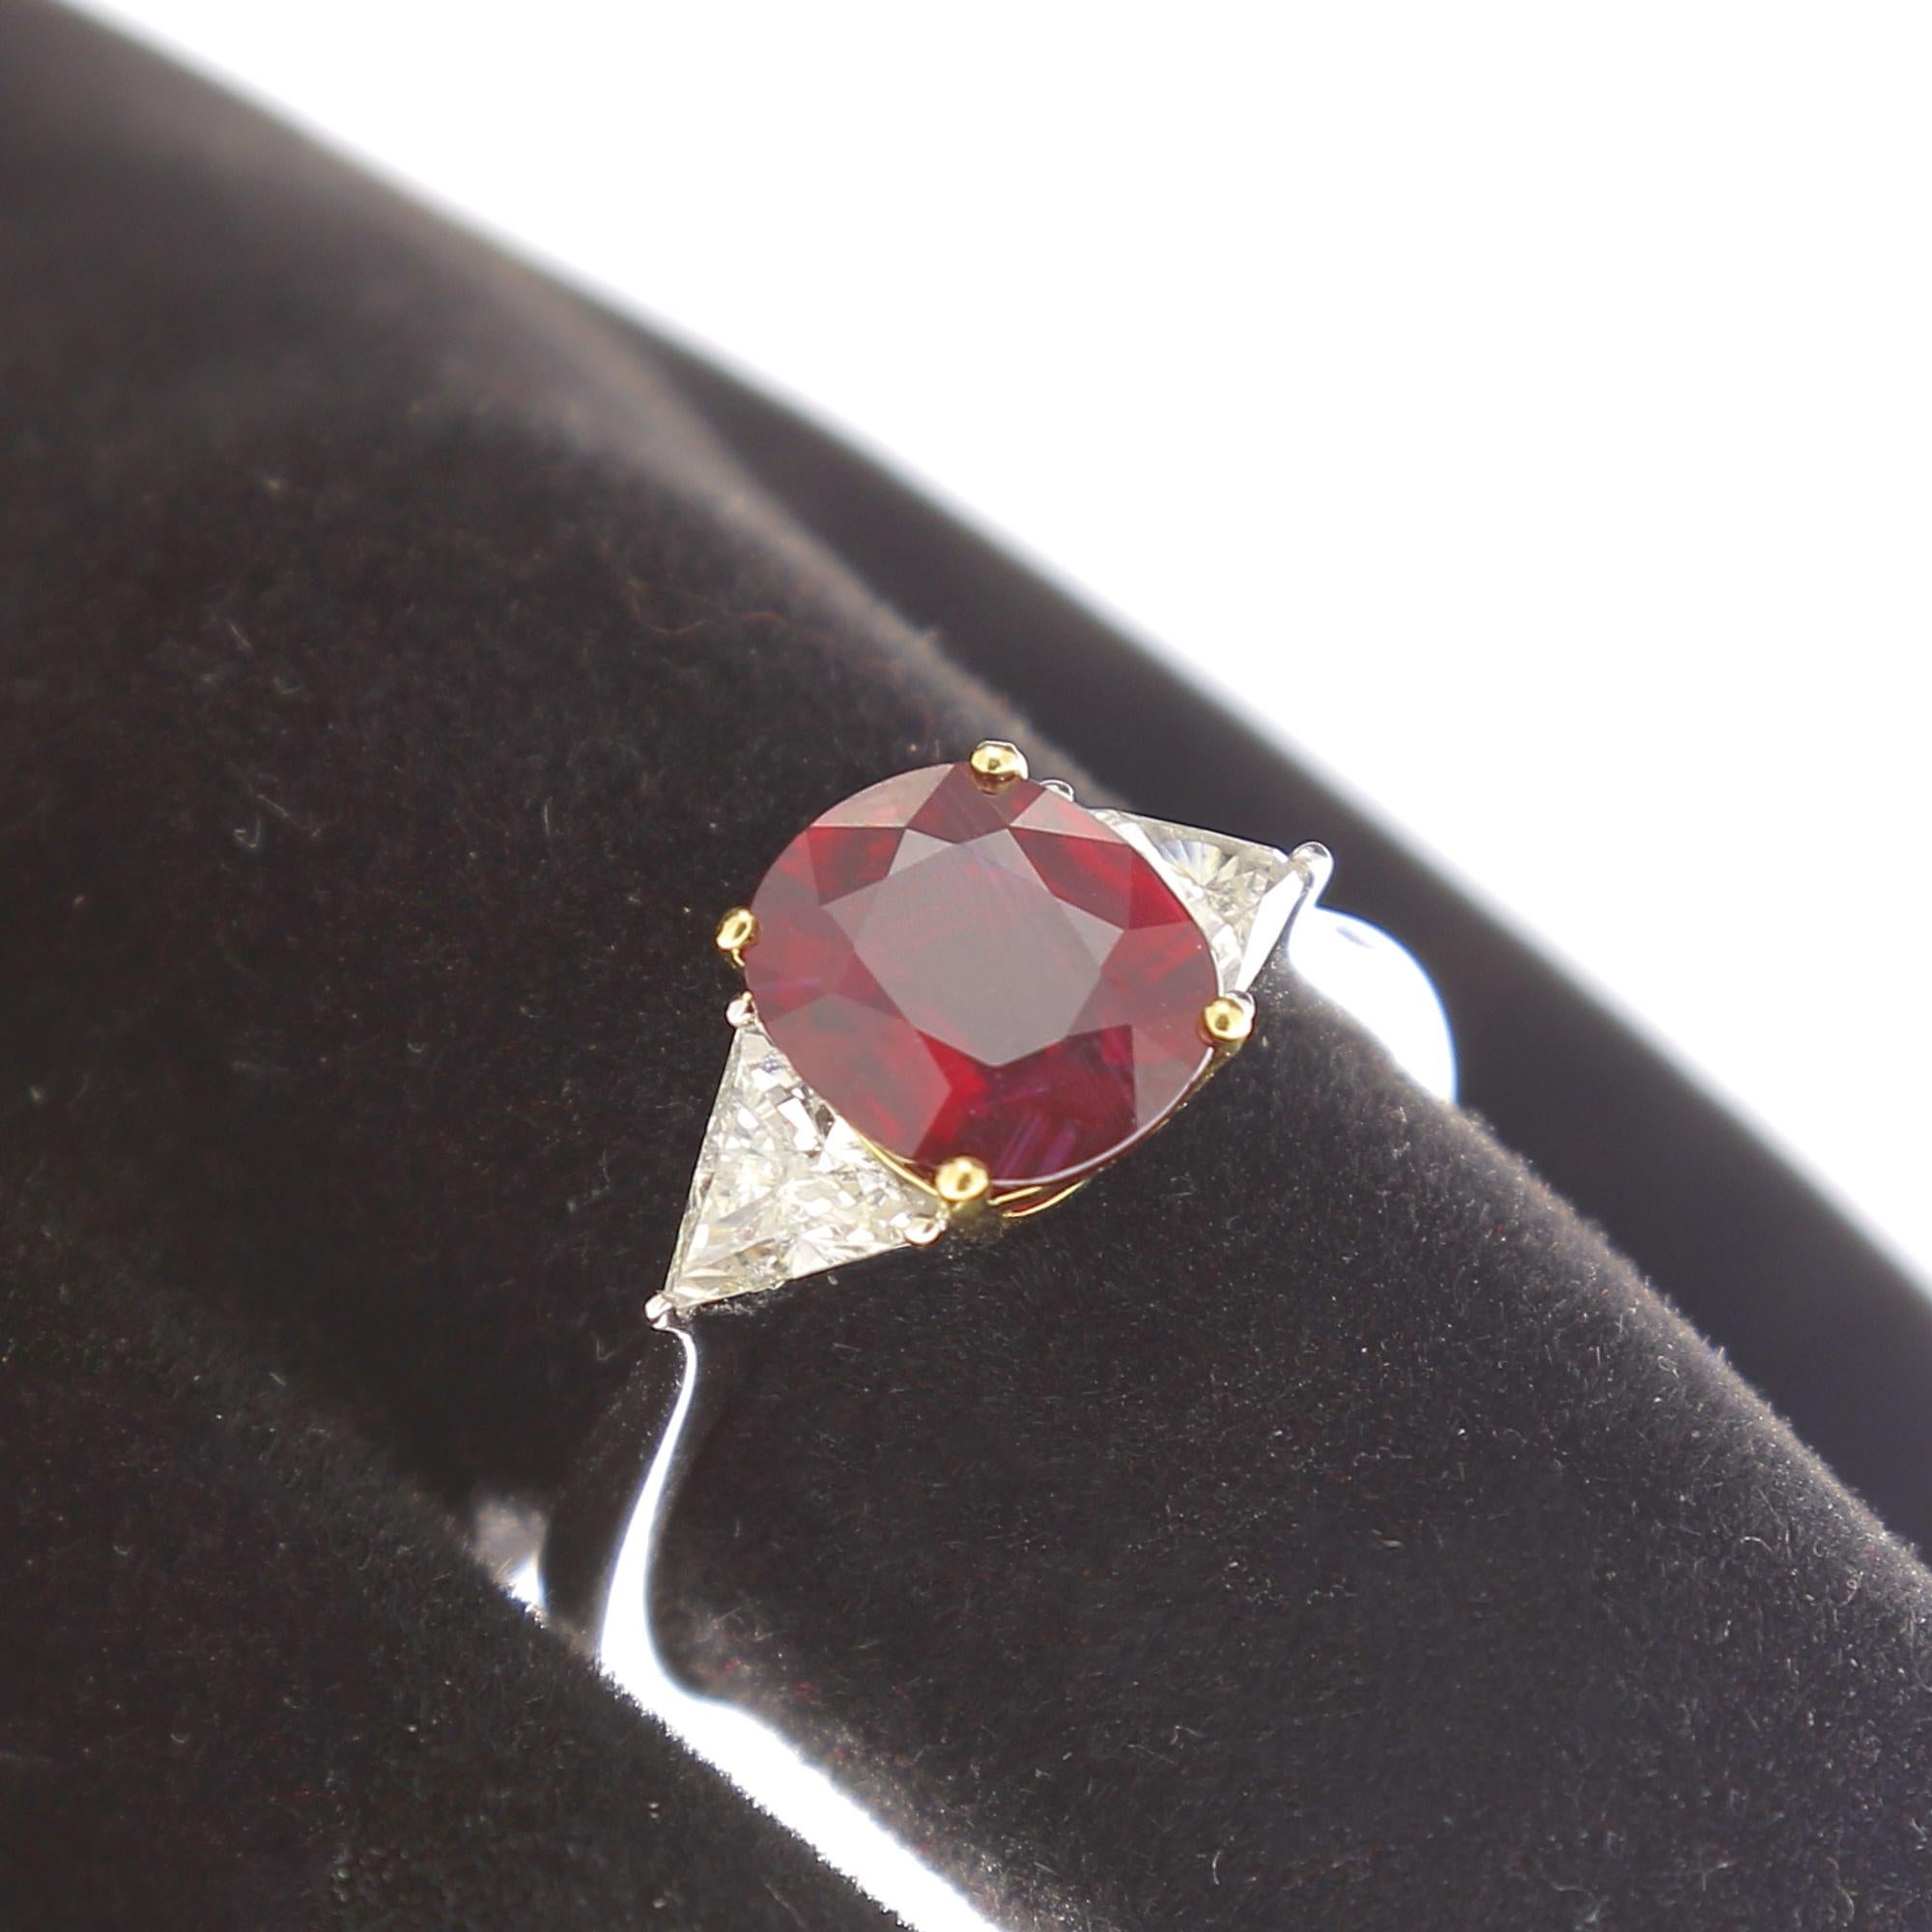 An amazing cushion ruby ring, set with 2 Trillion cut diamonds (also called “trilliant” or “trillian”).
The total weigh of the ruby is 2.08 Carats, the ruby is accompagned with a certificat stating as a Mozambique Ruby, and no indications of